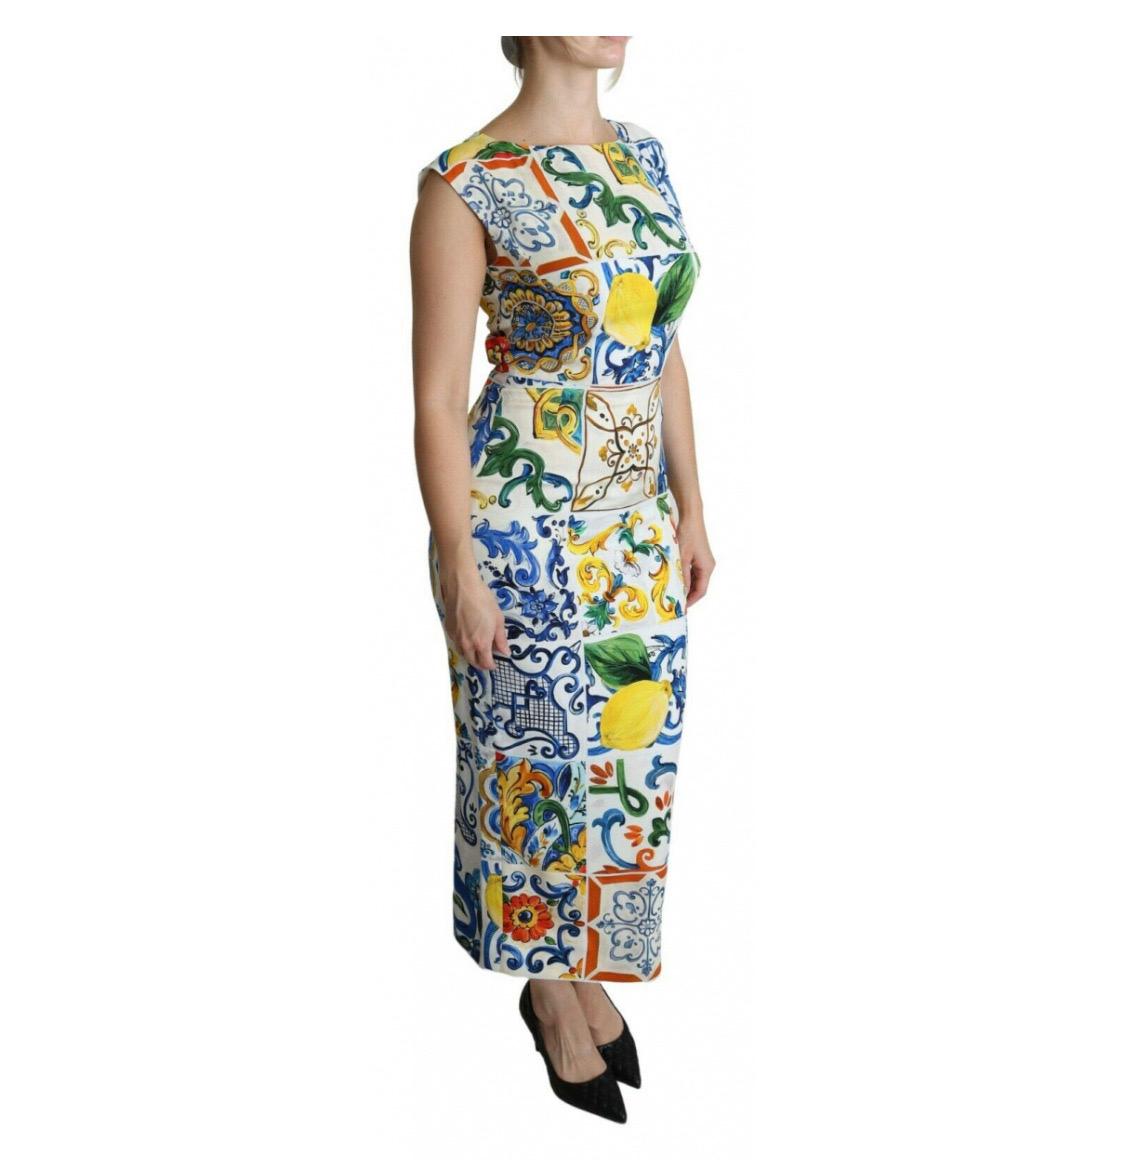 Gorgeous brand new with tags,
100% Authentic Dolce & Gabbana Dress conveys the beautiful
blue, yellow and green hues of the
Mediterranean, fashioned from native
rustic floral Majolica tile print fora

colourful touch.

Model: Sheath Maxi

Color: